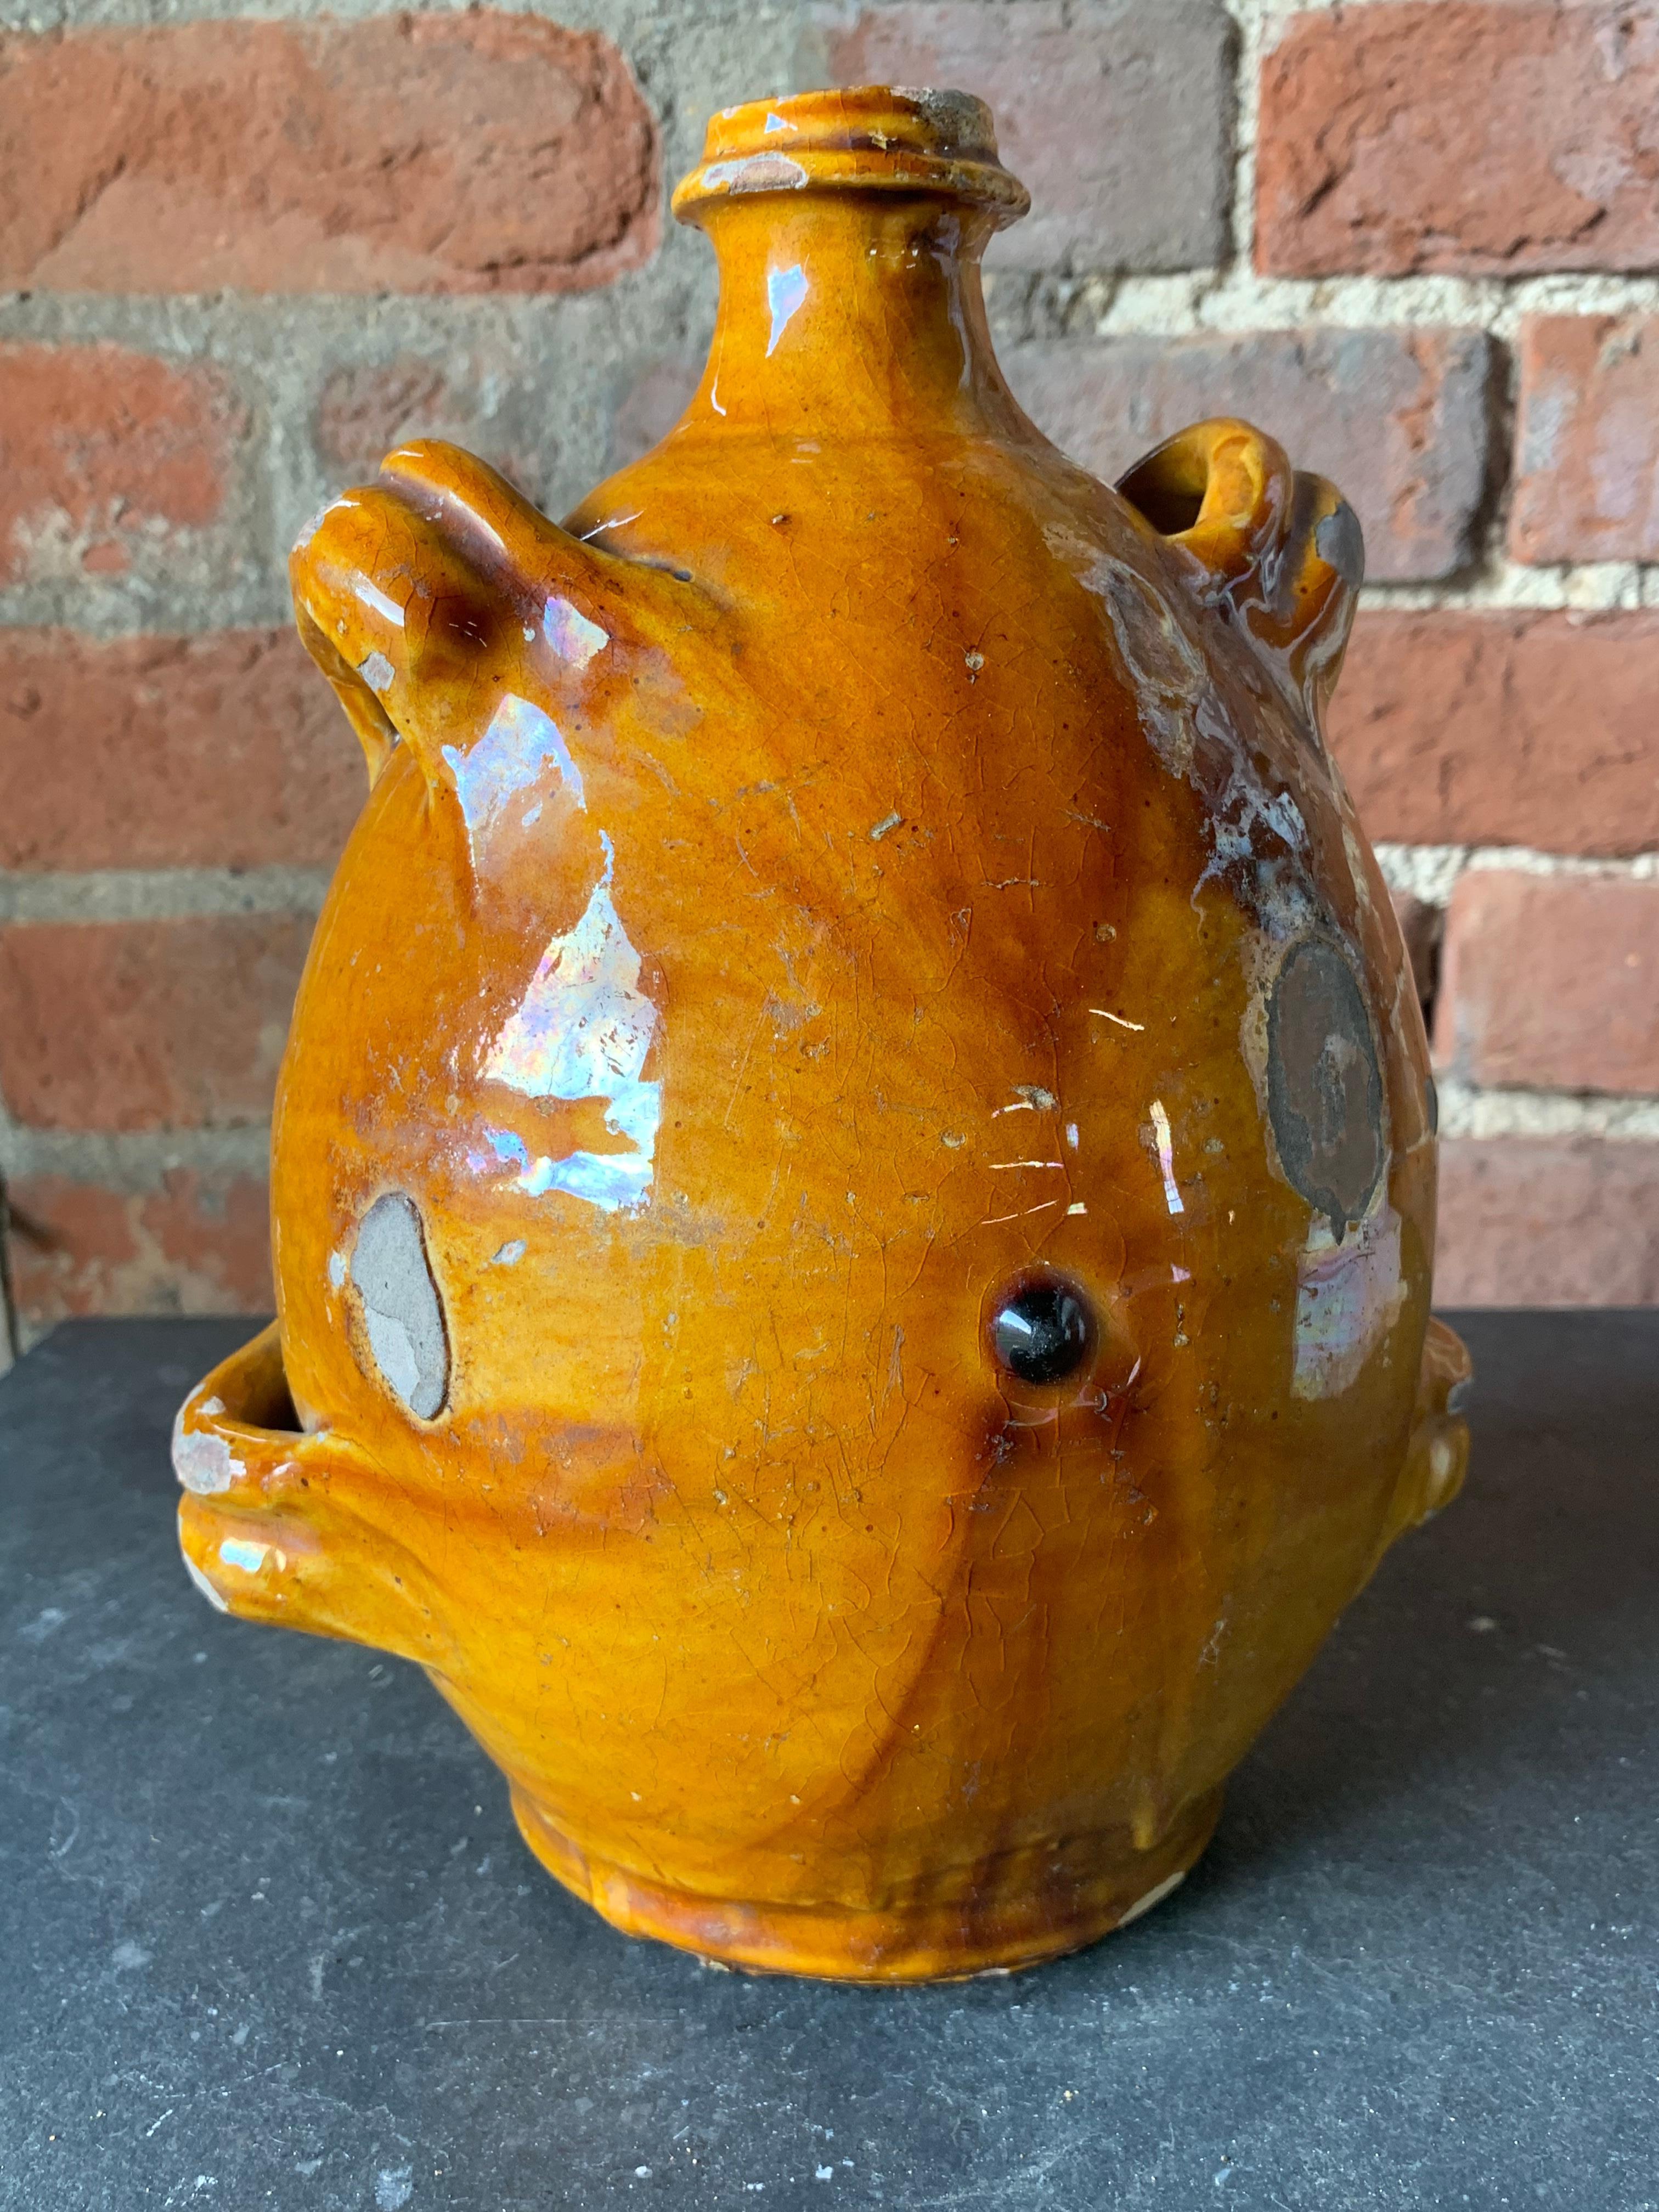 A rare and beautiful late 18th early 19th century French Conscience vessel which were used for carrying water. This one has the most wonderful vibrant colour glaze making it a very decorative and collectable piece.
Please contact us for a worldwide